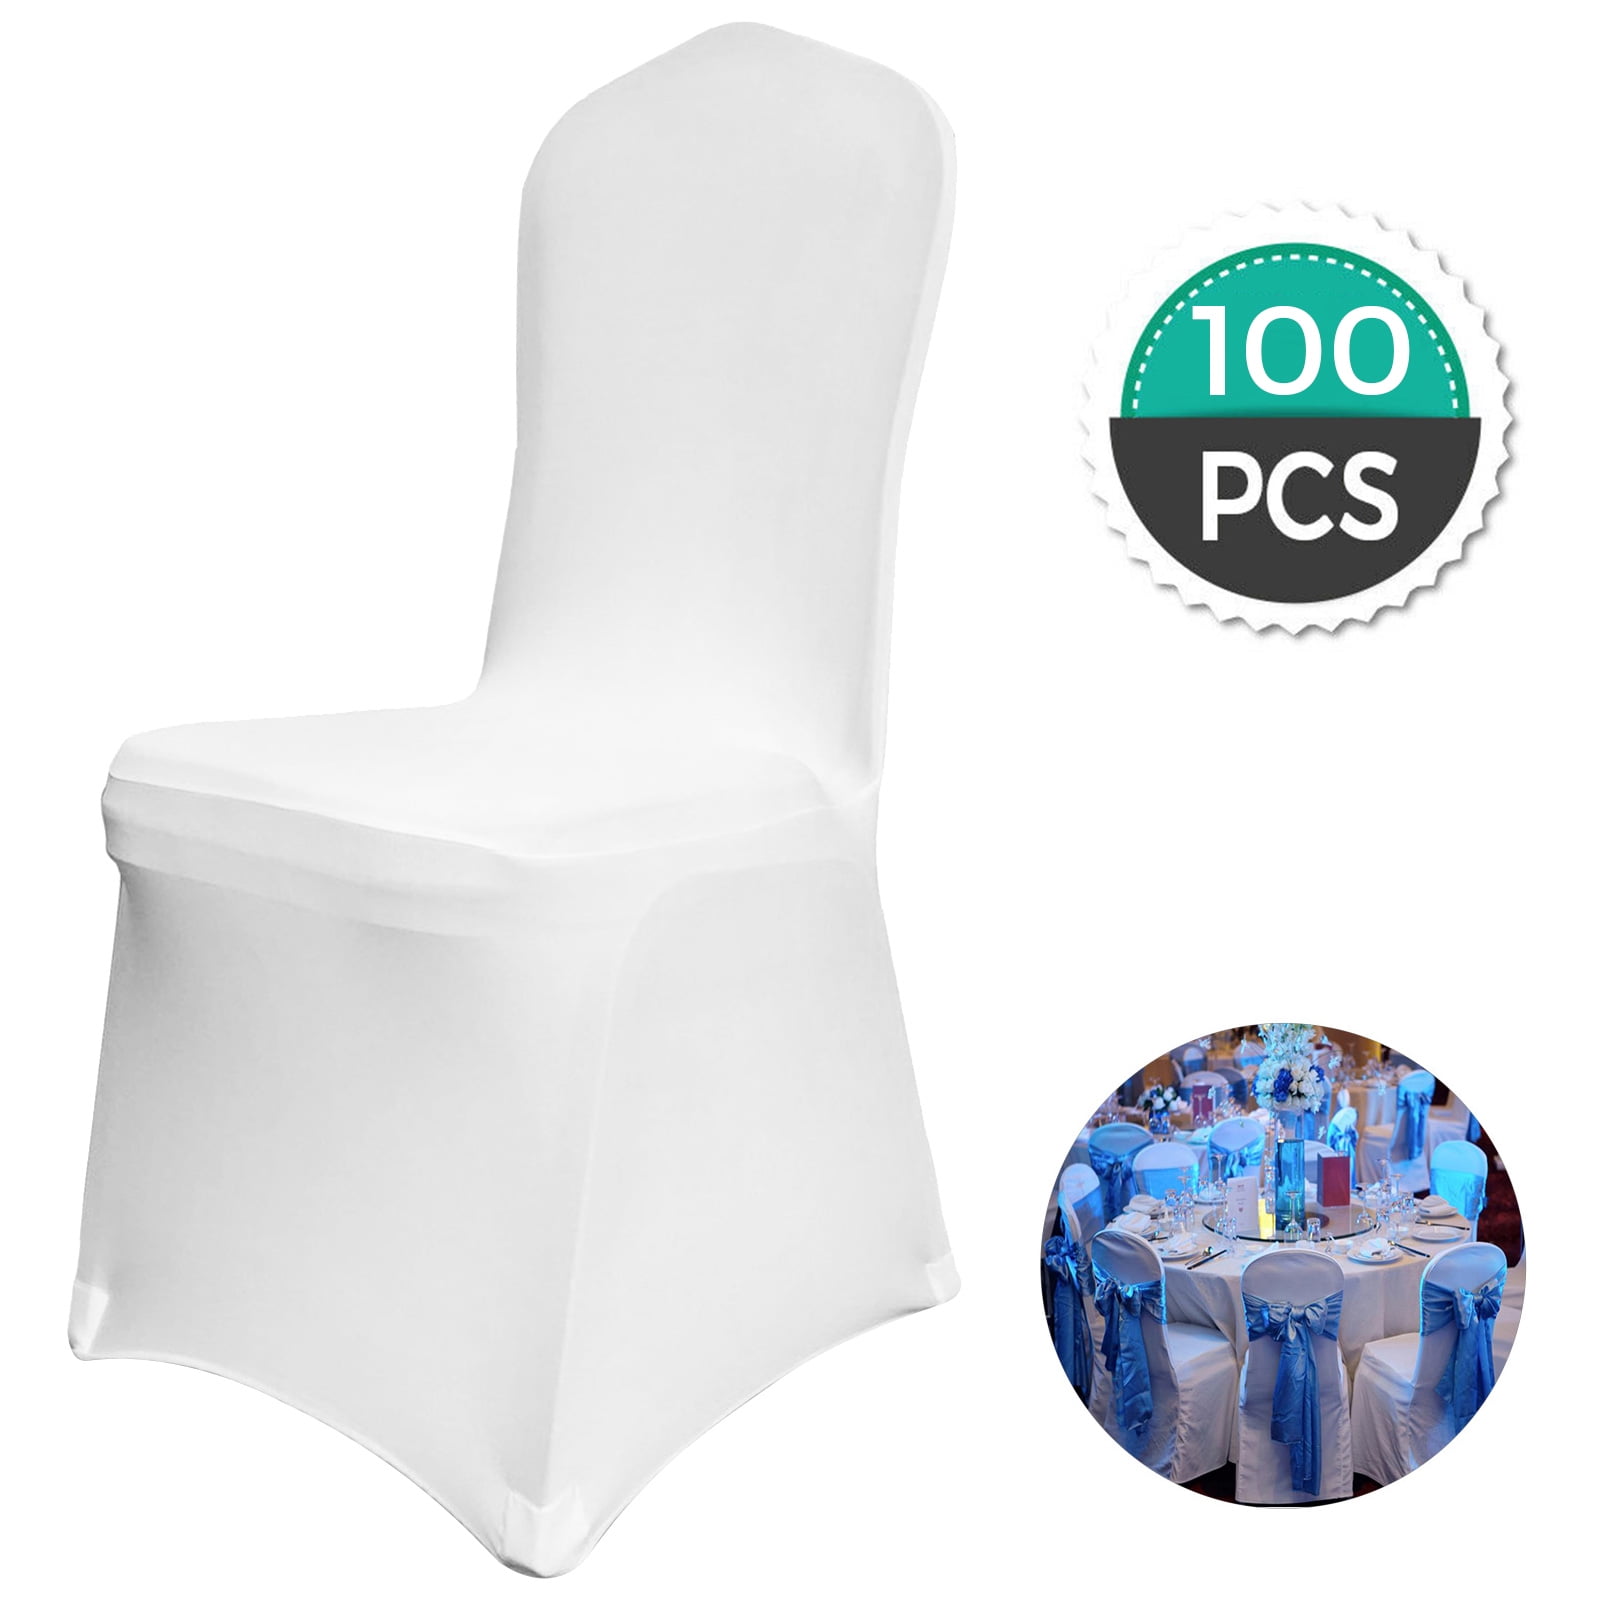 100 Spandex Lycra Banquet Chair Covers 2 Colors Stretch Wedding Party Event 